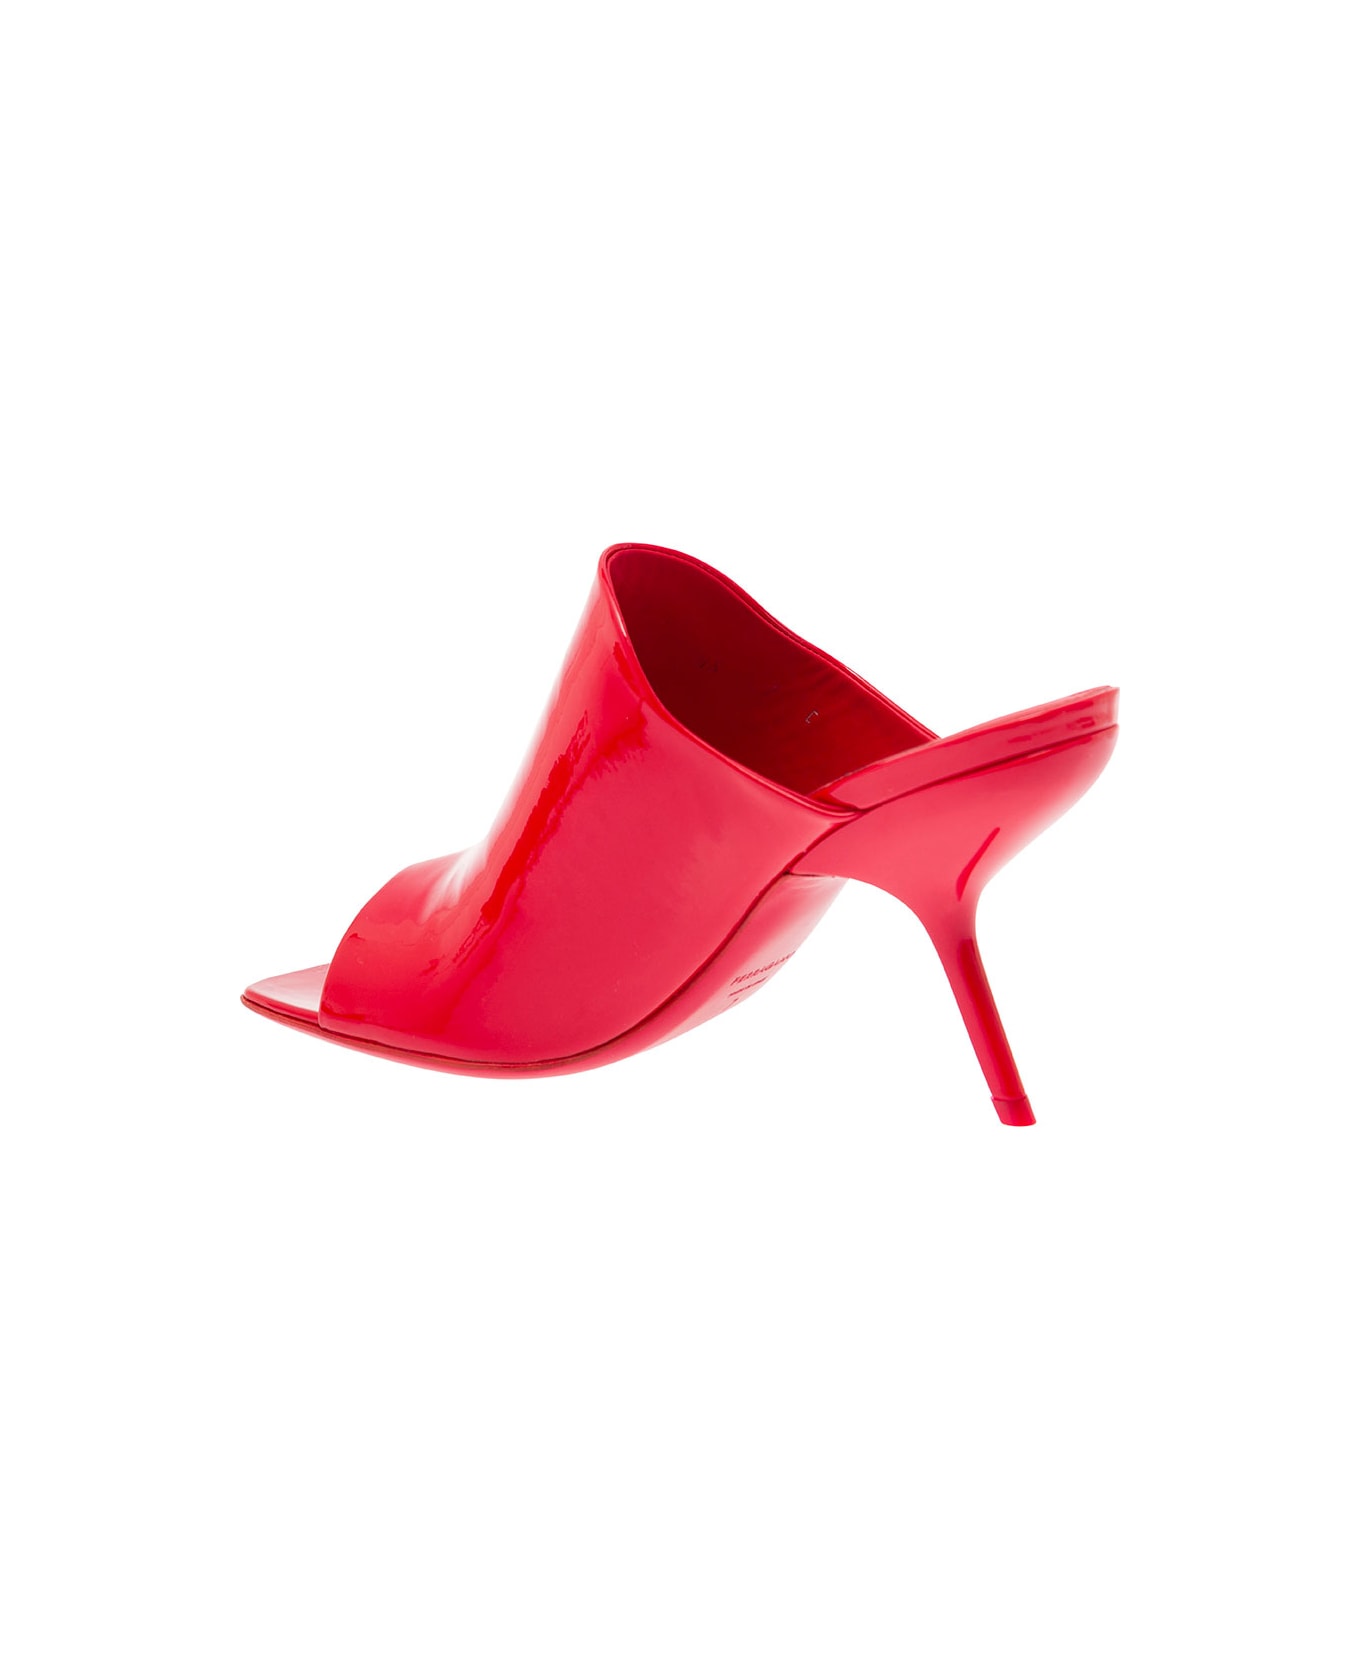 Ferragamo 'open Toe' Red Slide With Slanted, Contoured Heel In Patent Leather Woman - RED